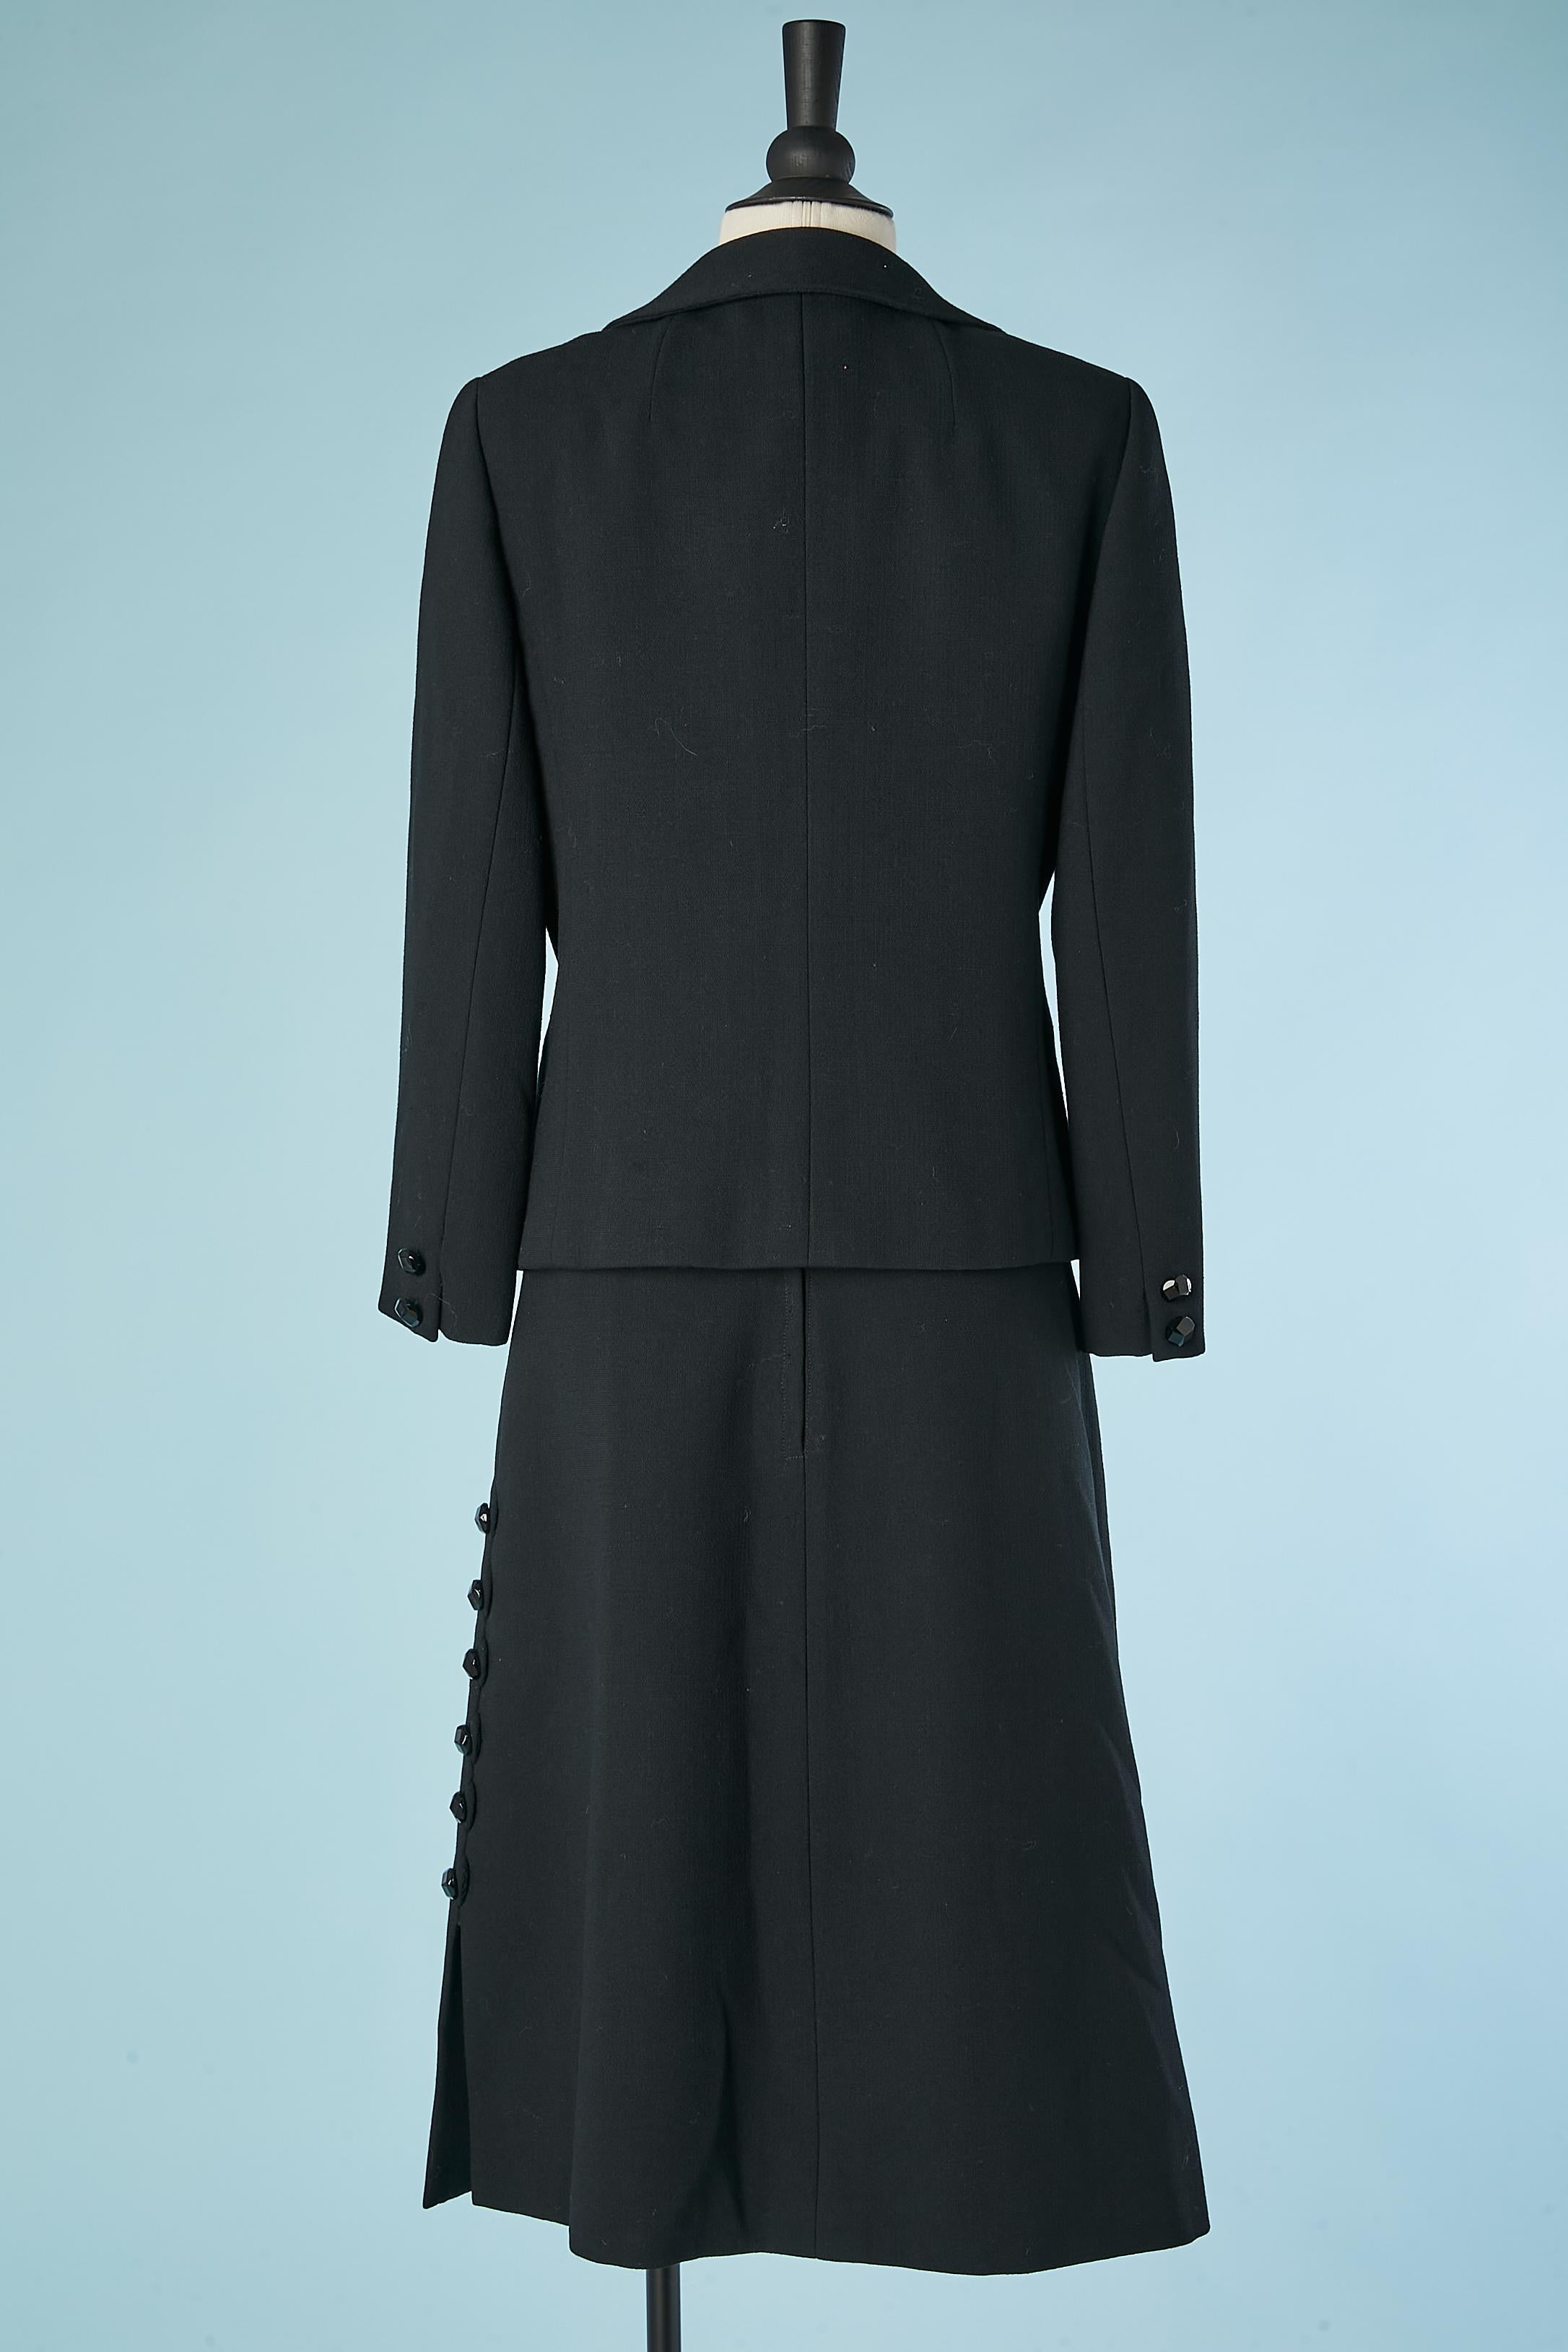 Black wool crêpe skit-suit with black buttons Christian Dior New-York Circa 1950 For Sale 2